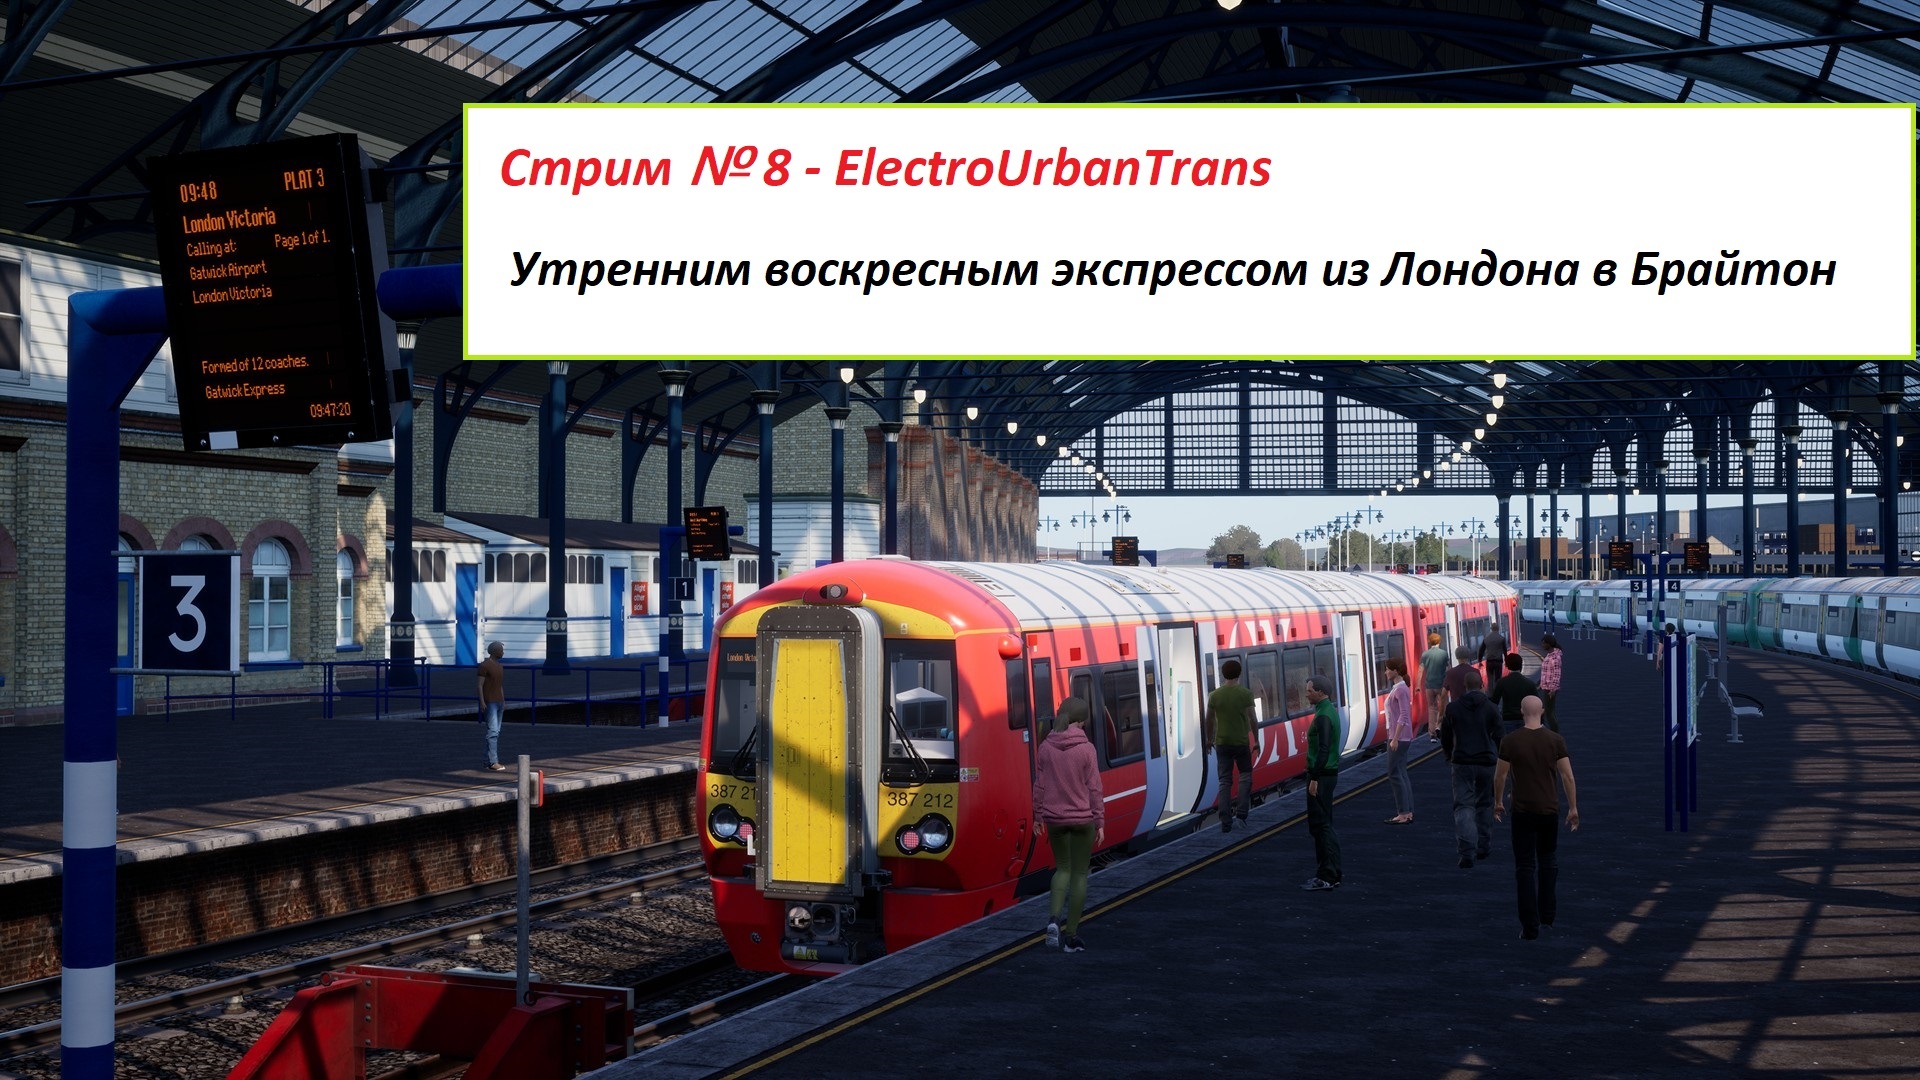 london-commuter-brings-the-most-challenging-route-to-train-sim-world-2_1 — копия.jpg